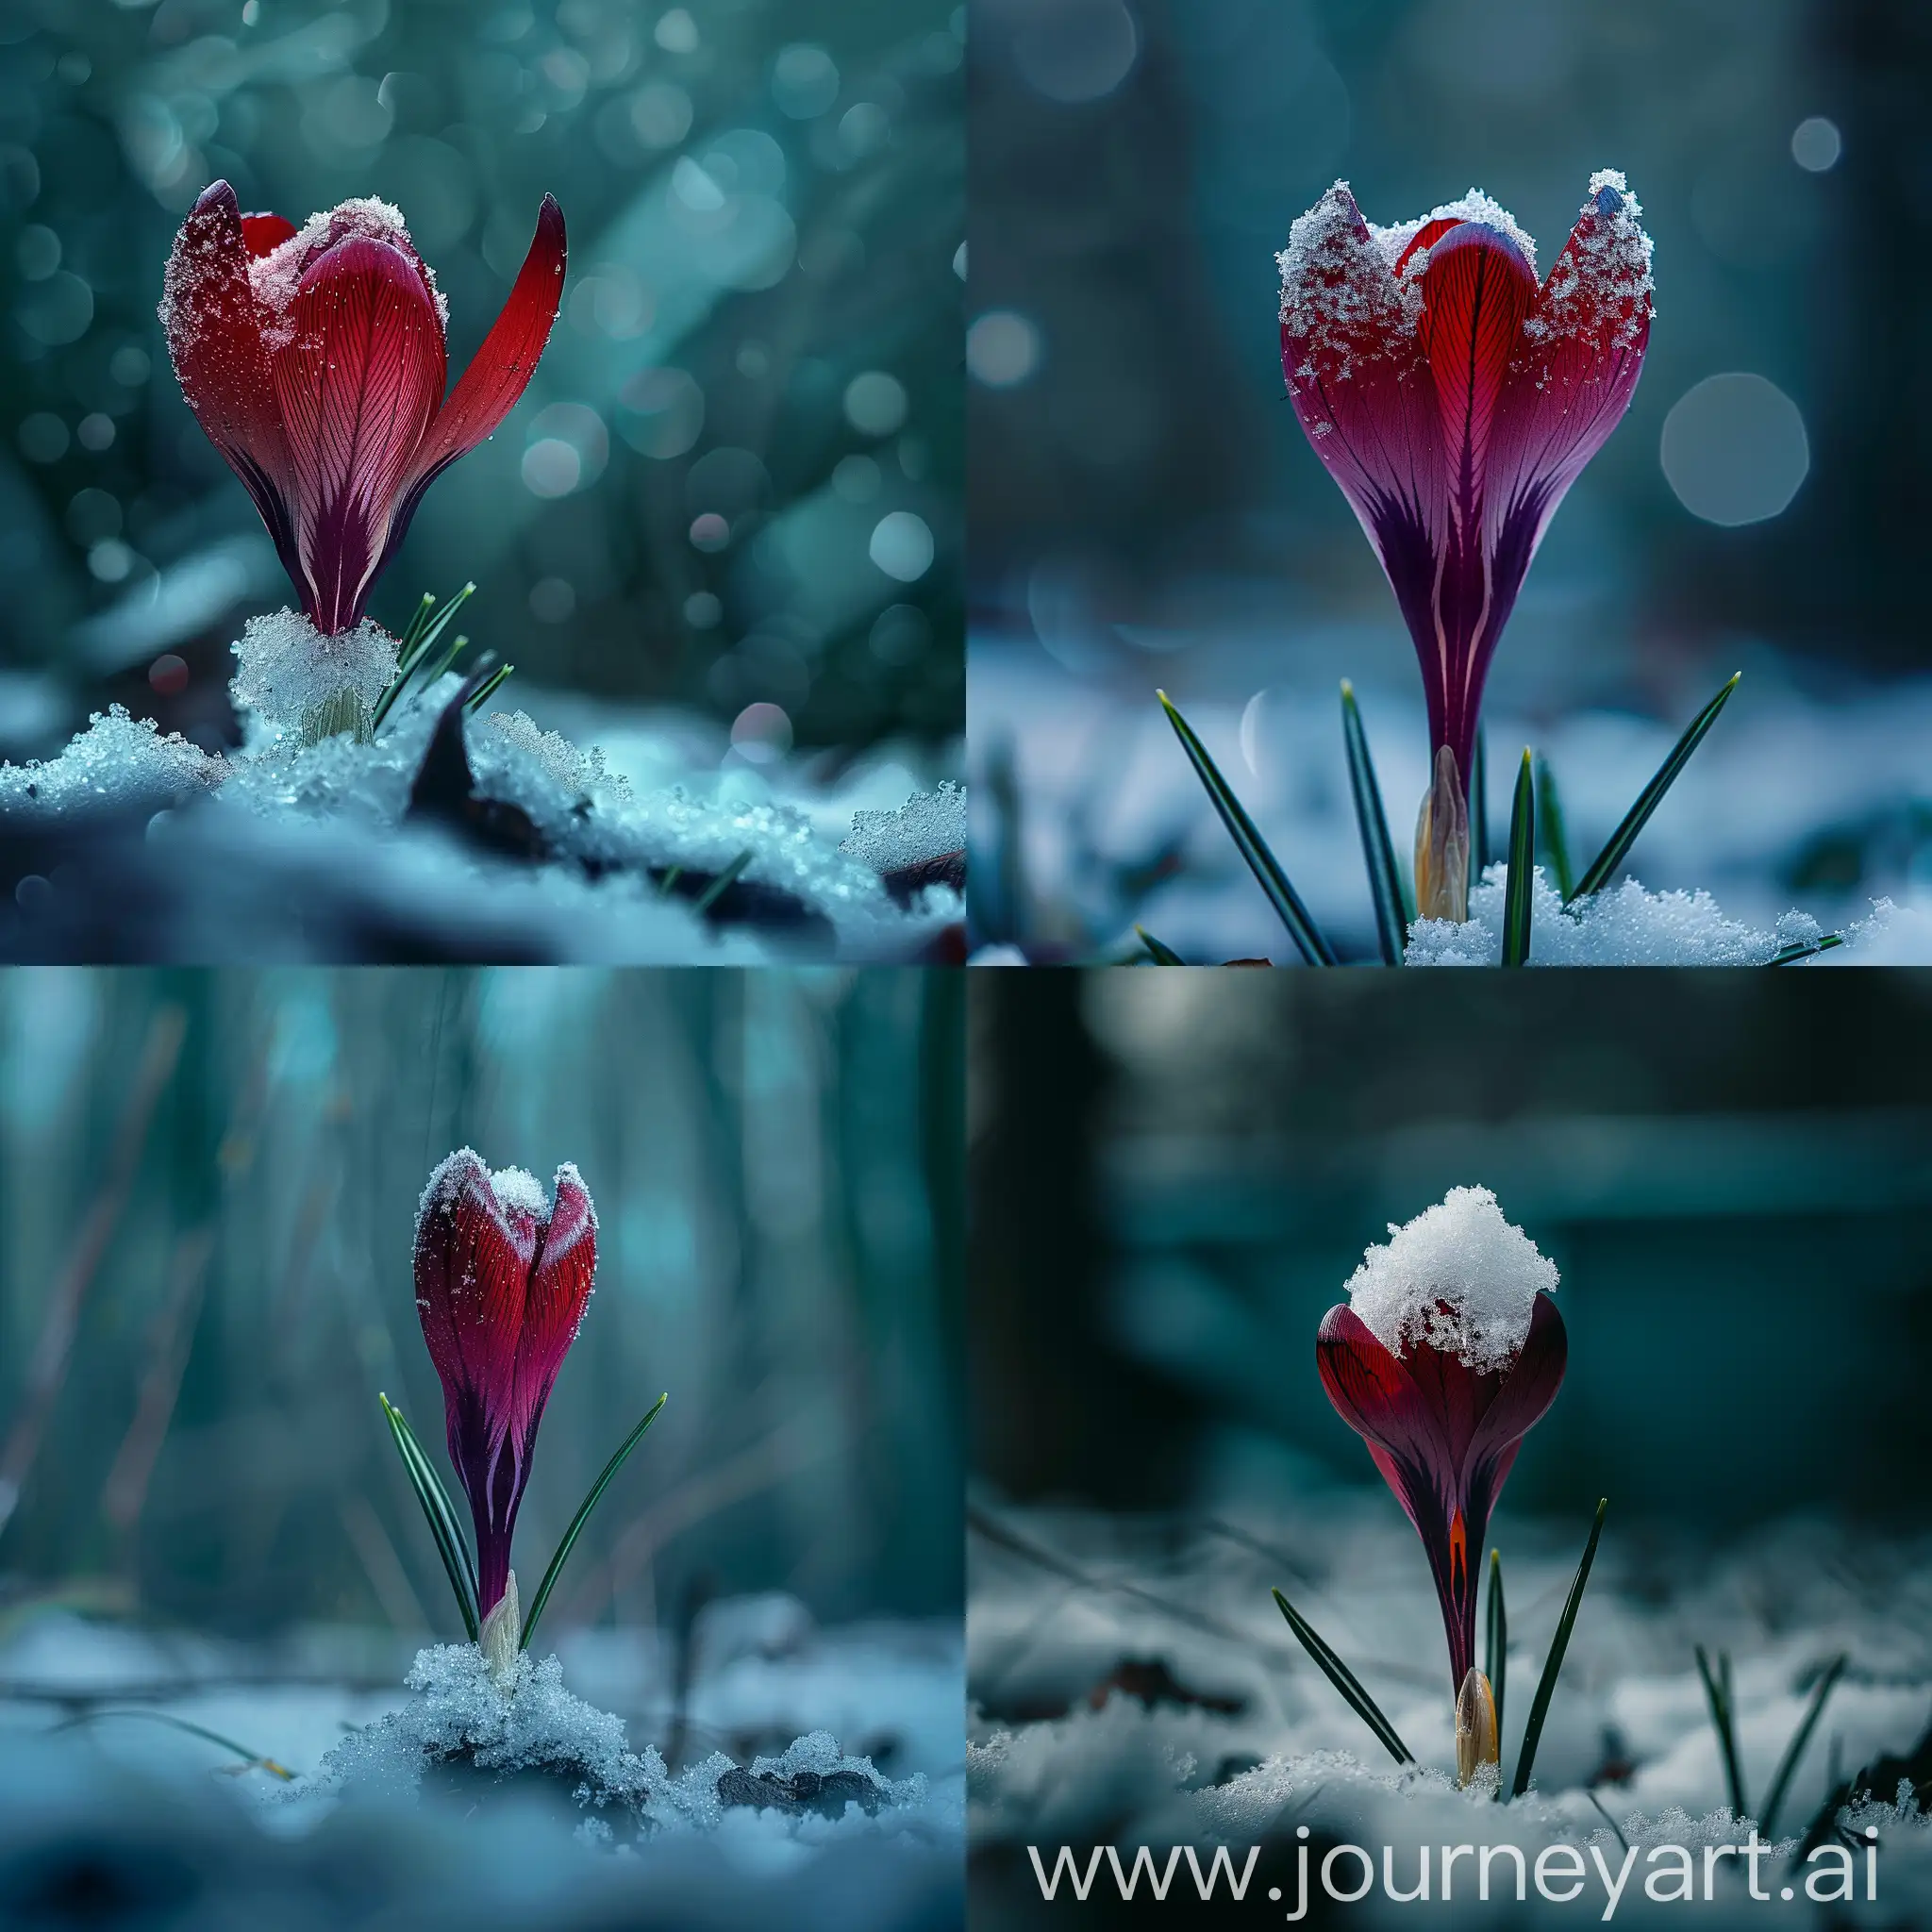 Burgundy-Crocus-Covered-in-Snow-Enchanting-Macro-Shot-in-a-Mystical-Forest